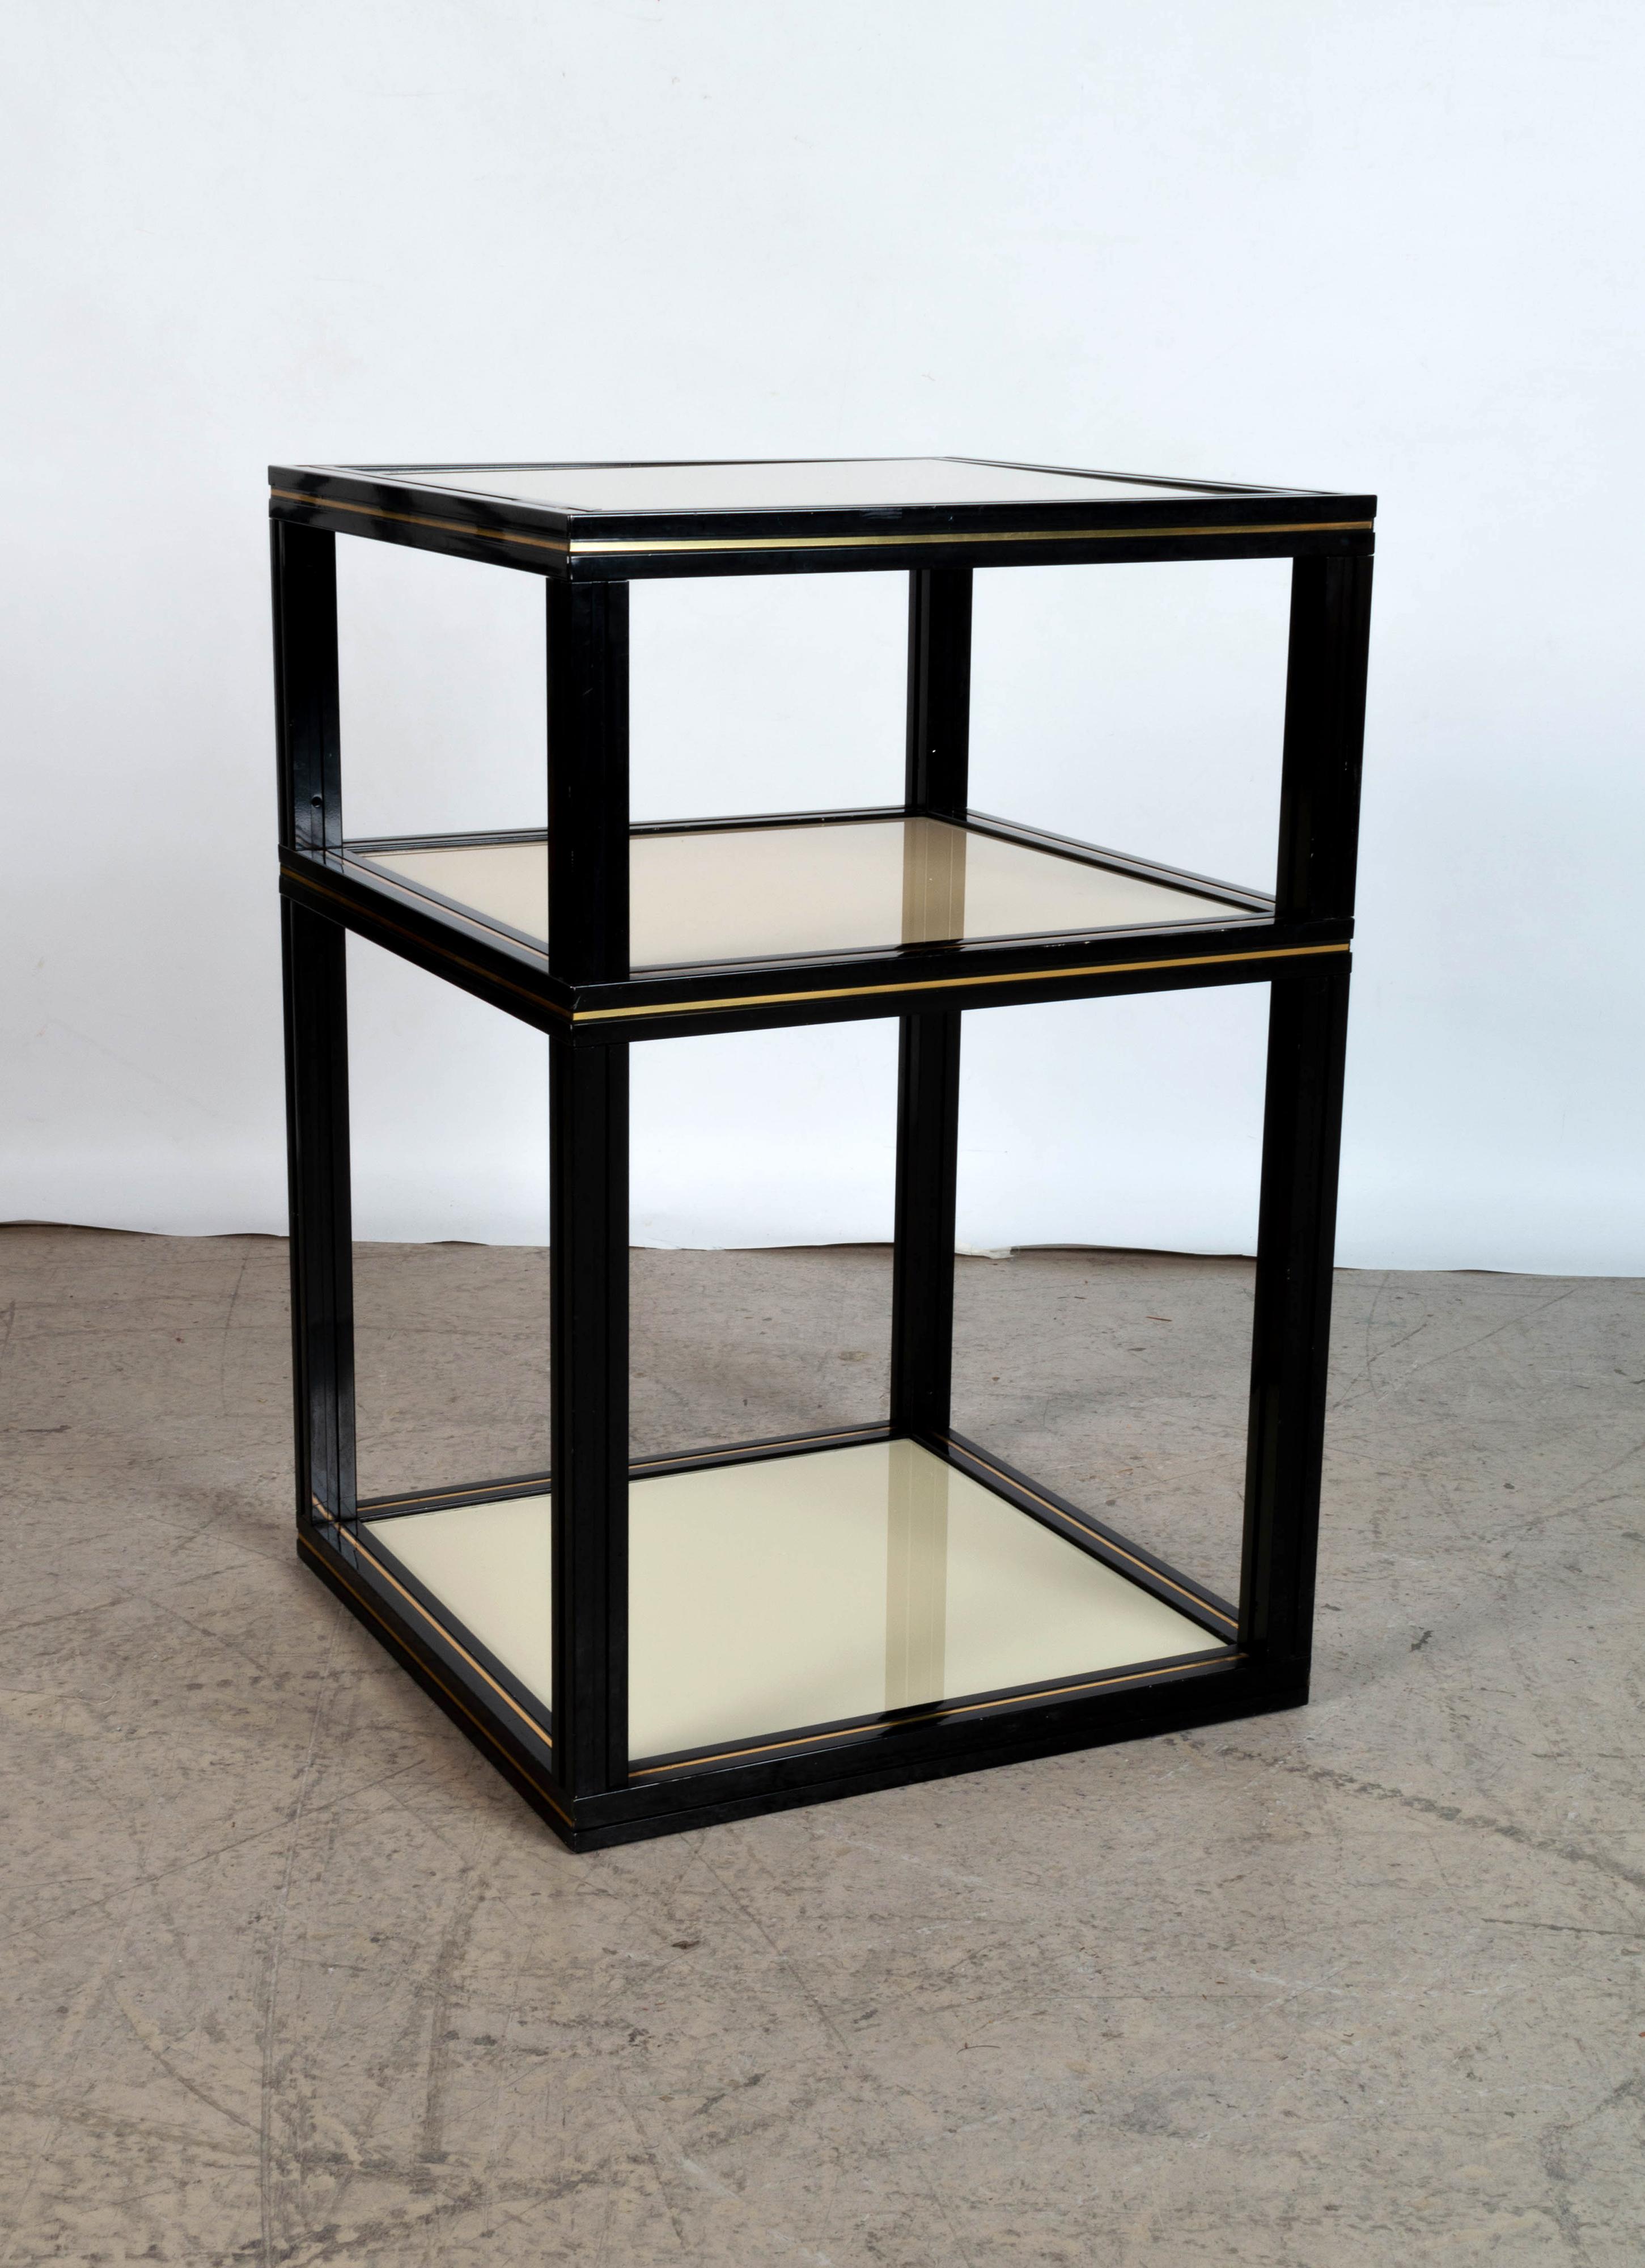 20th Century French Mid-Century Etagere Lacquered Side Table by Pierre Vandel, Paris C.1970 For Sale